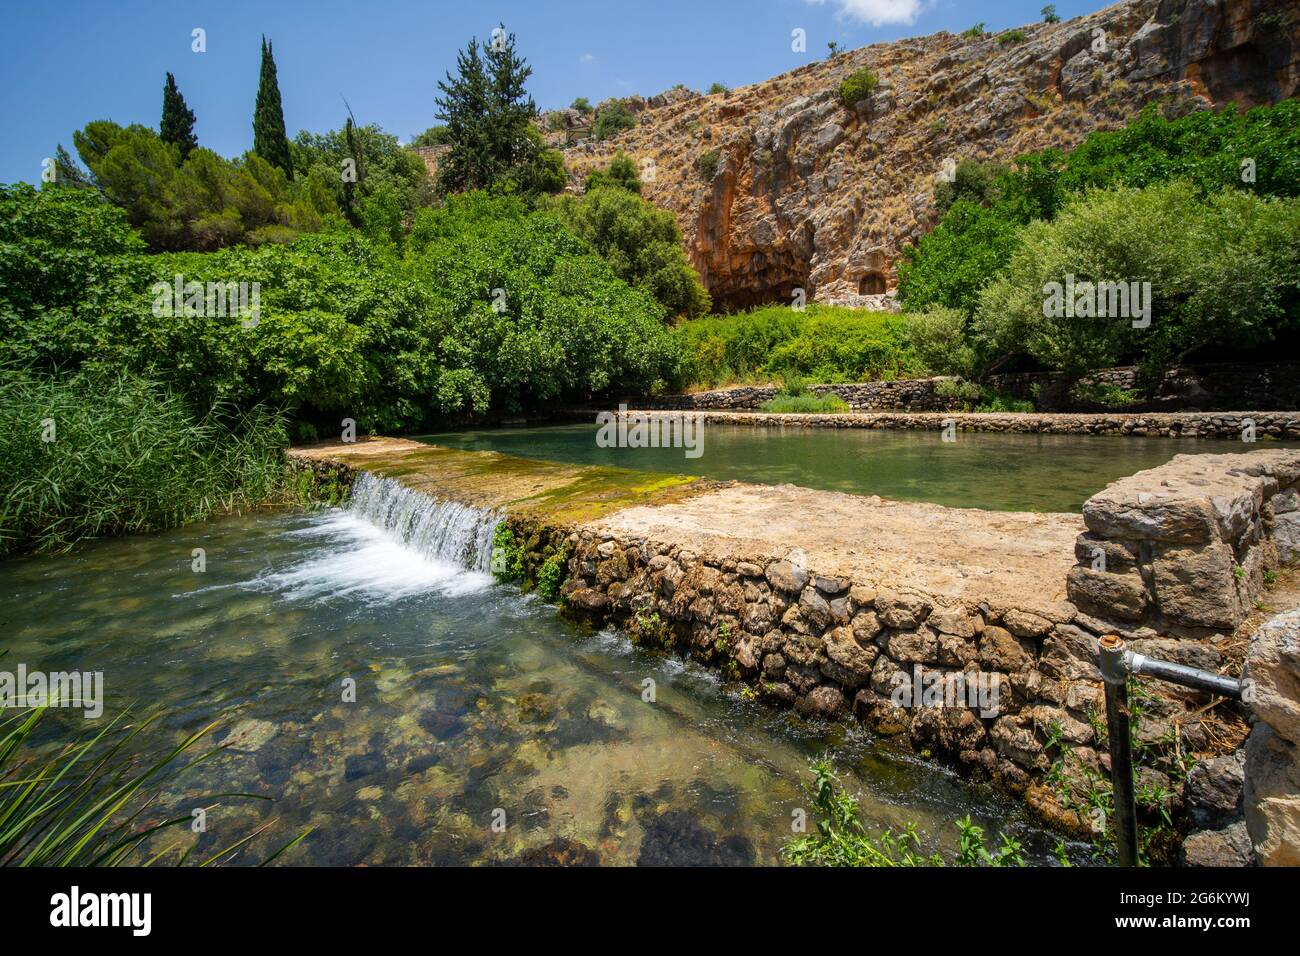 Banias Spring and Stream (Banias River or Hermon River) Golan Heights, Israel This spring is one of the sources of the River Jordan Stock Photo